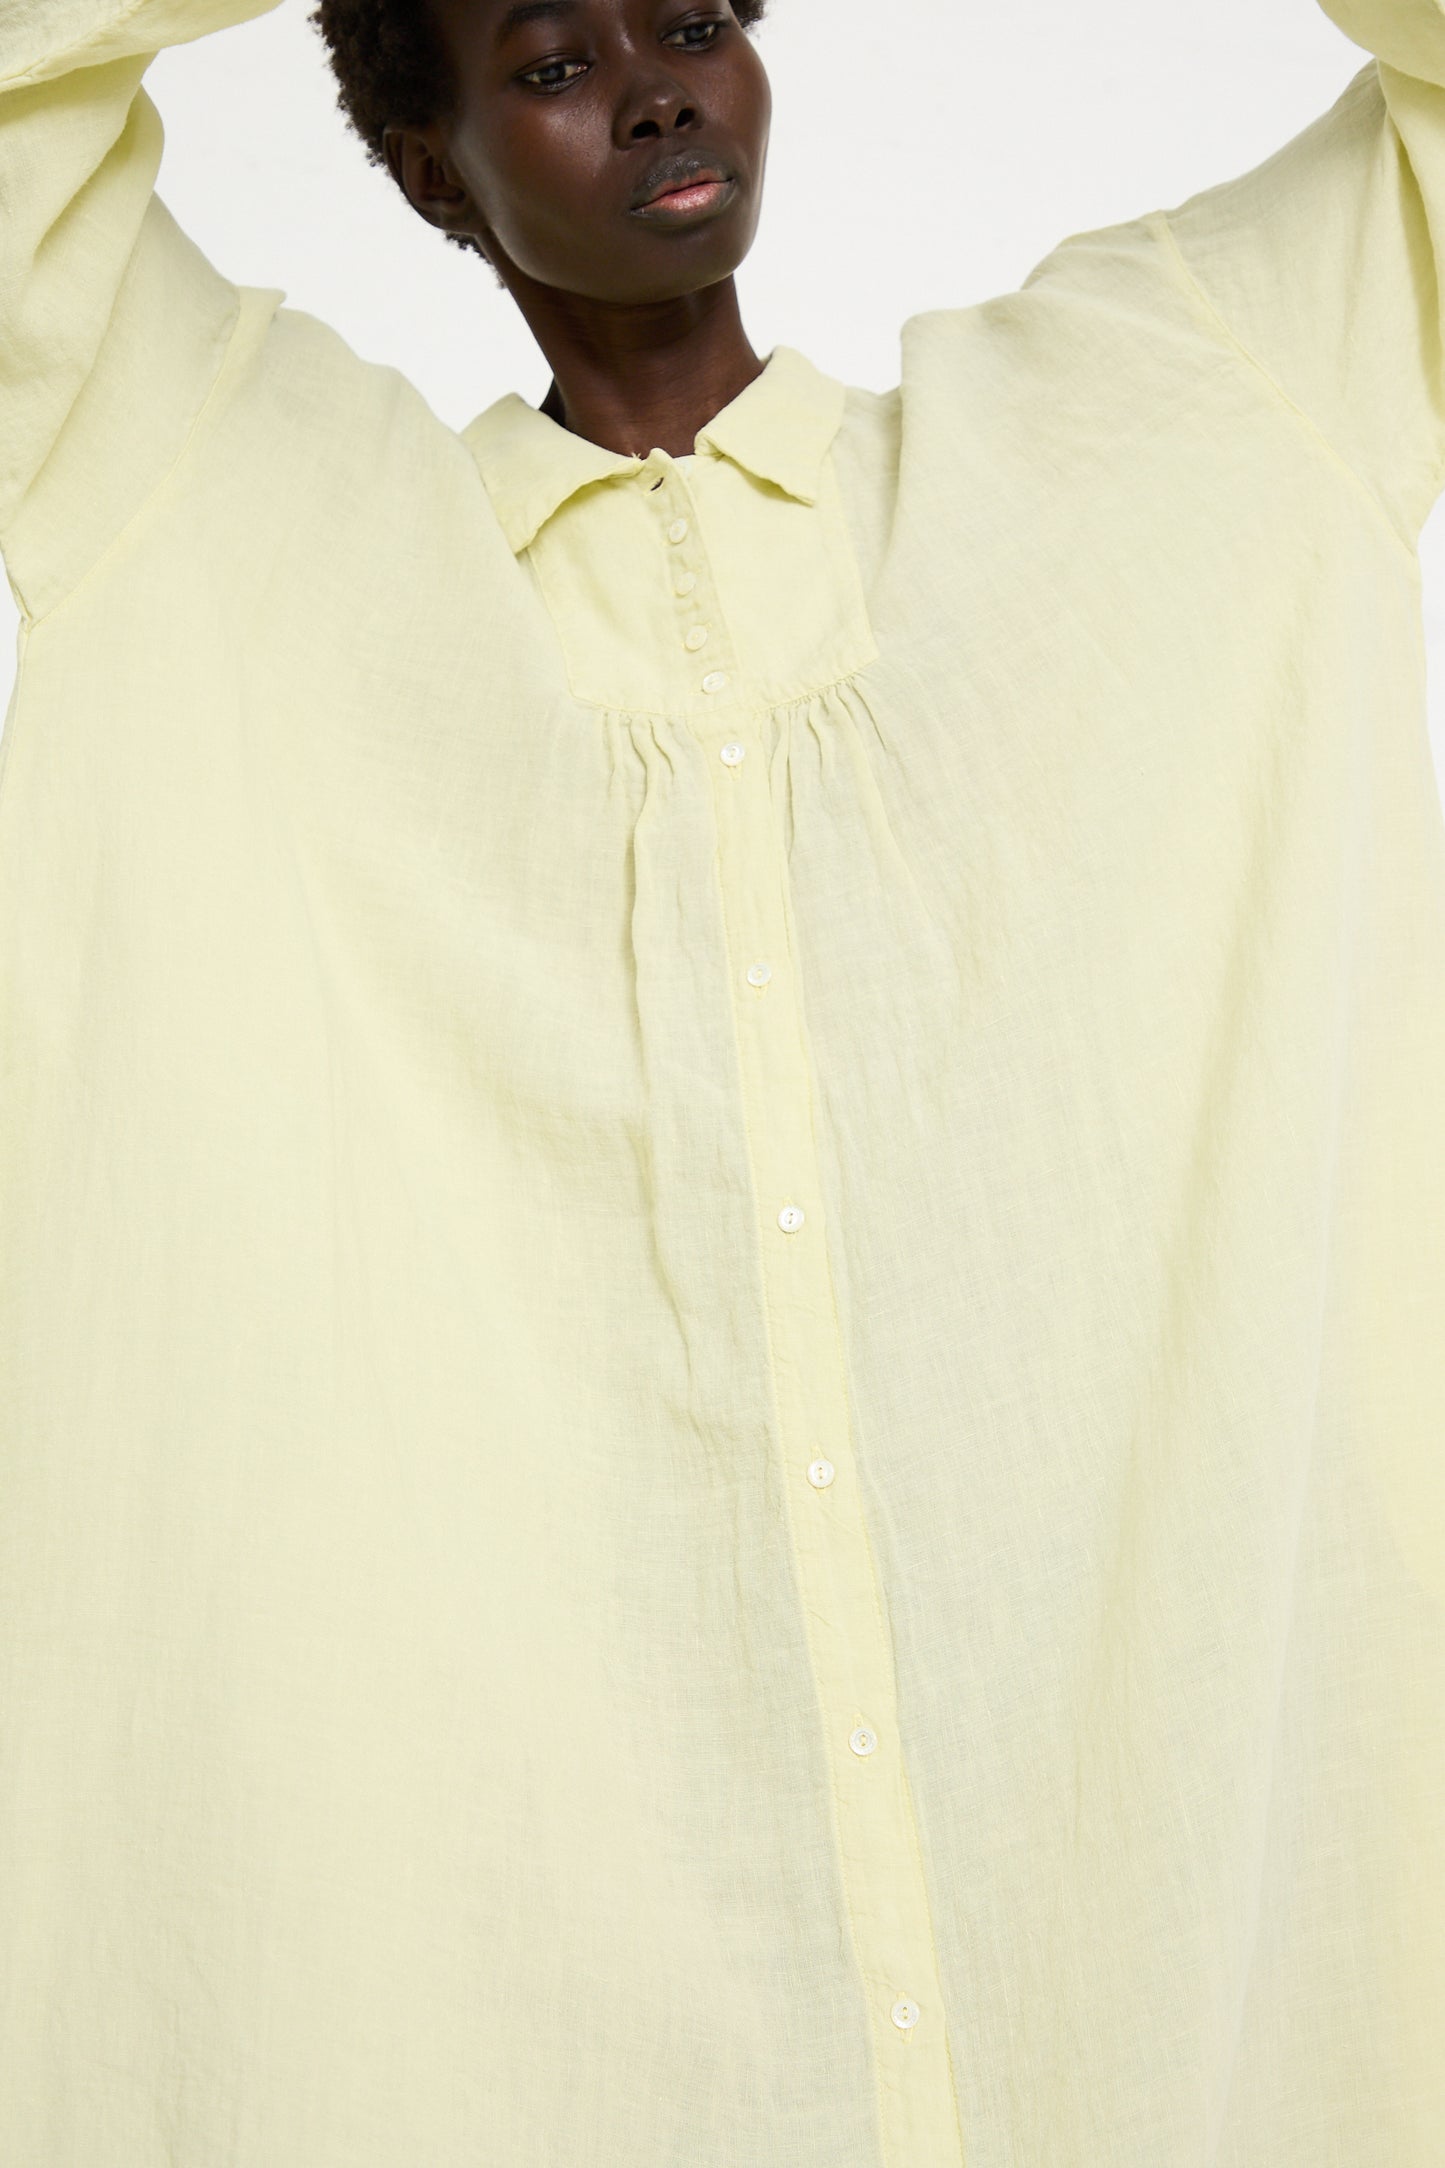 Person wearing a button-up, loose-fitting Linen Omi-Zarashi Shirt Dress in Lemon by nest Robe with arms raised, showcasing the garment's size and textured fabric.